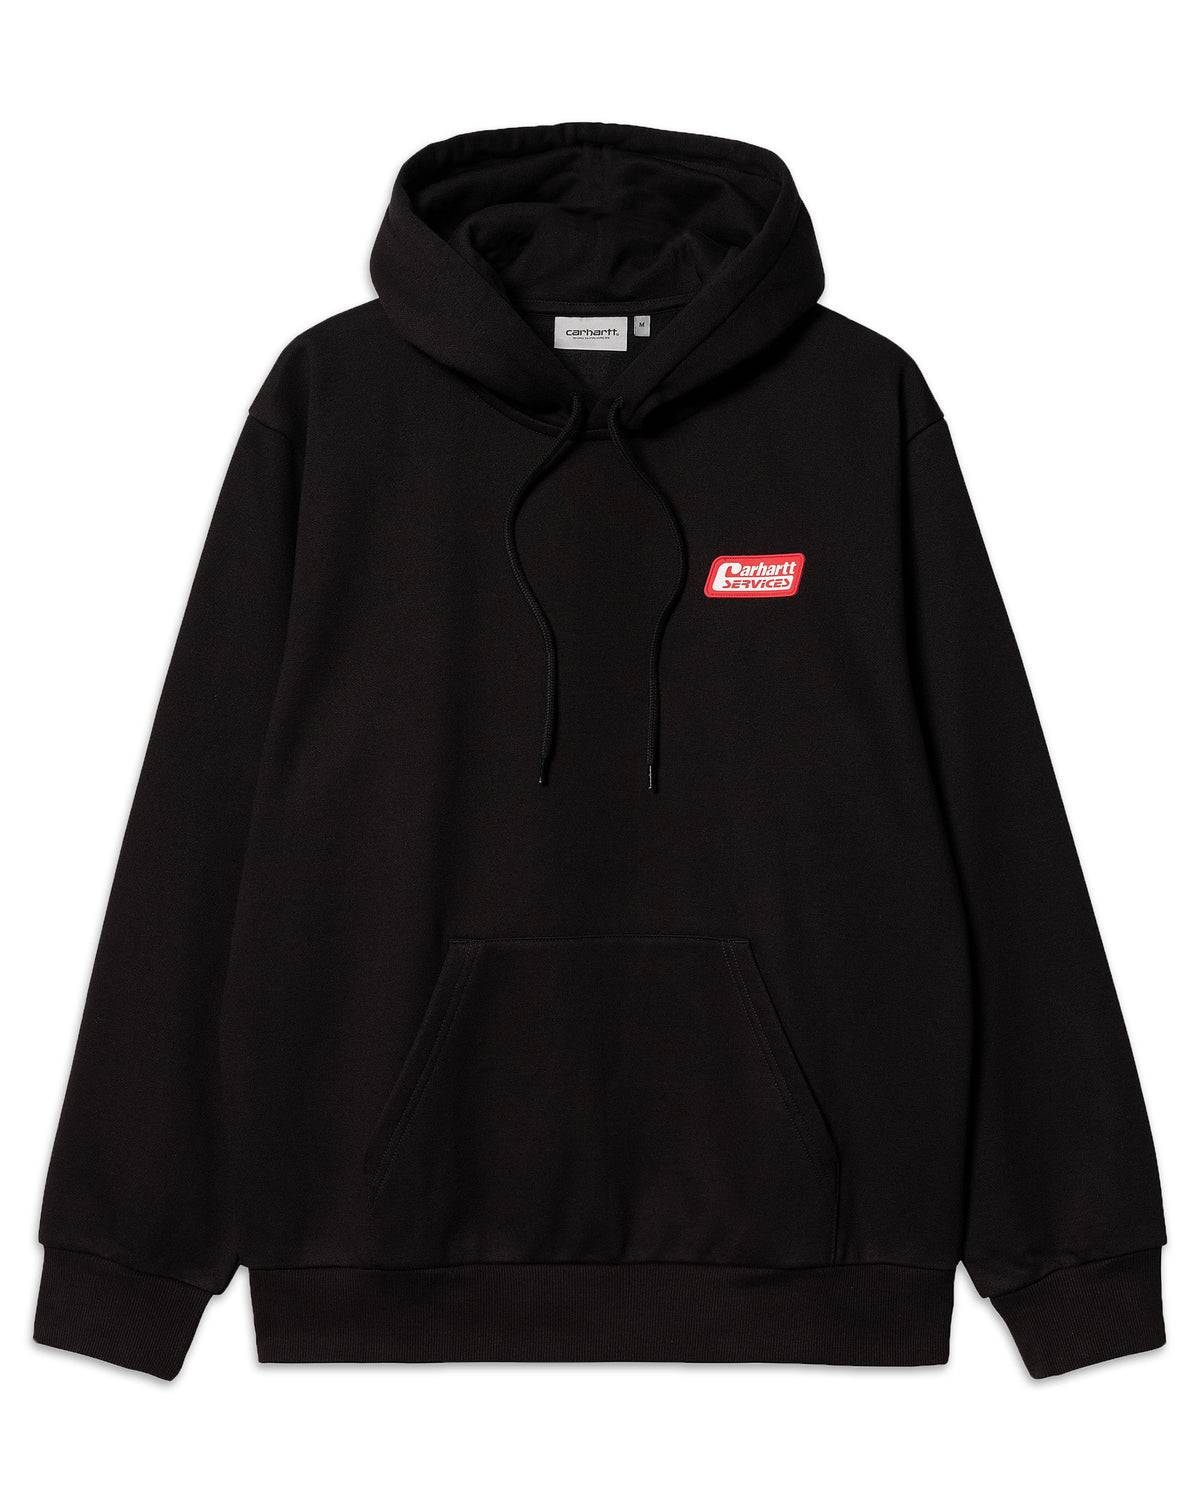 Carhartt Wip Hooded Freight Services Sweat Black